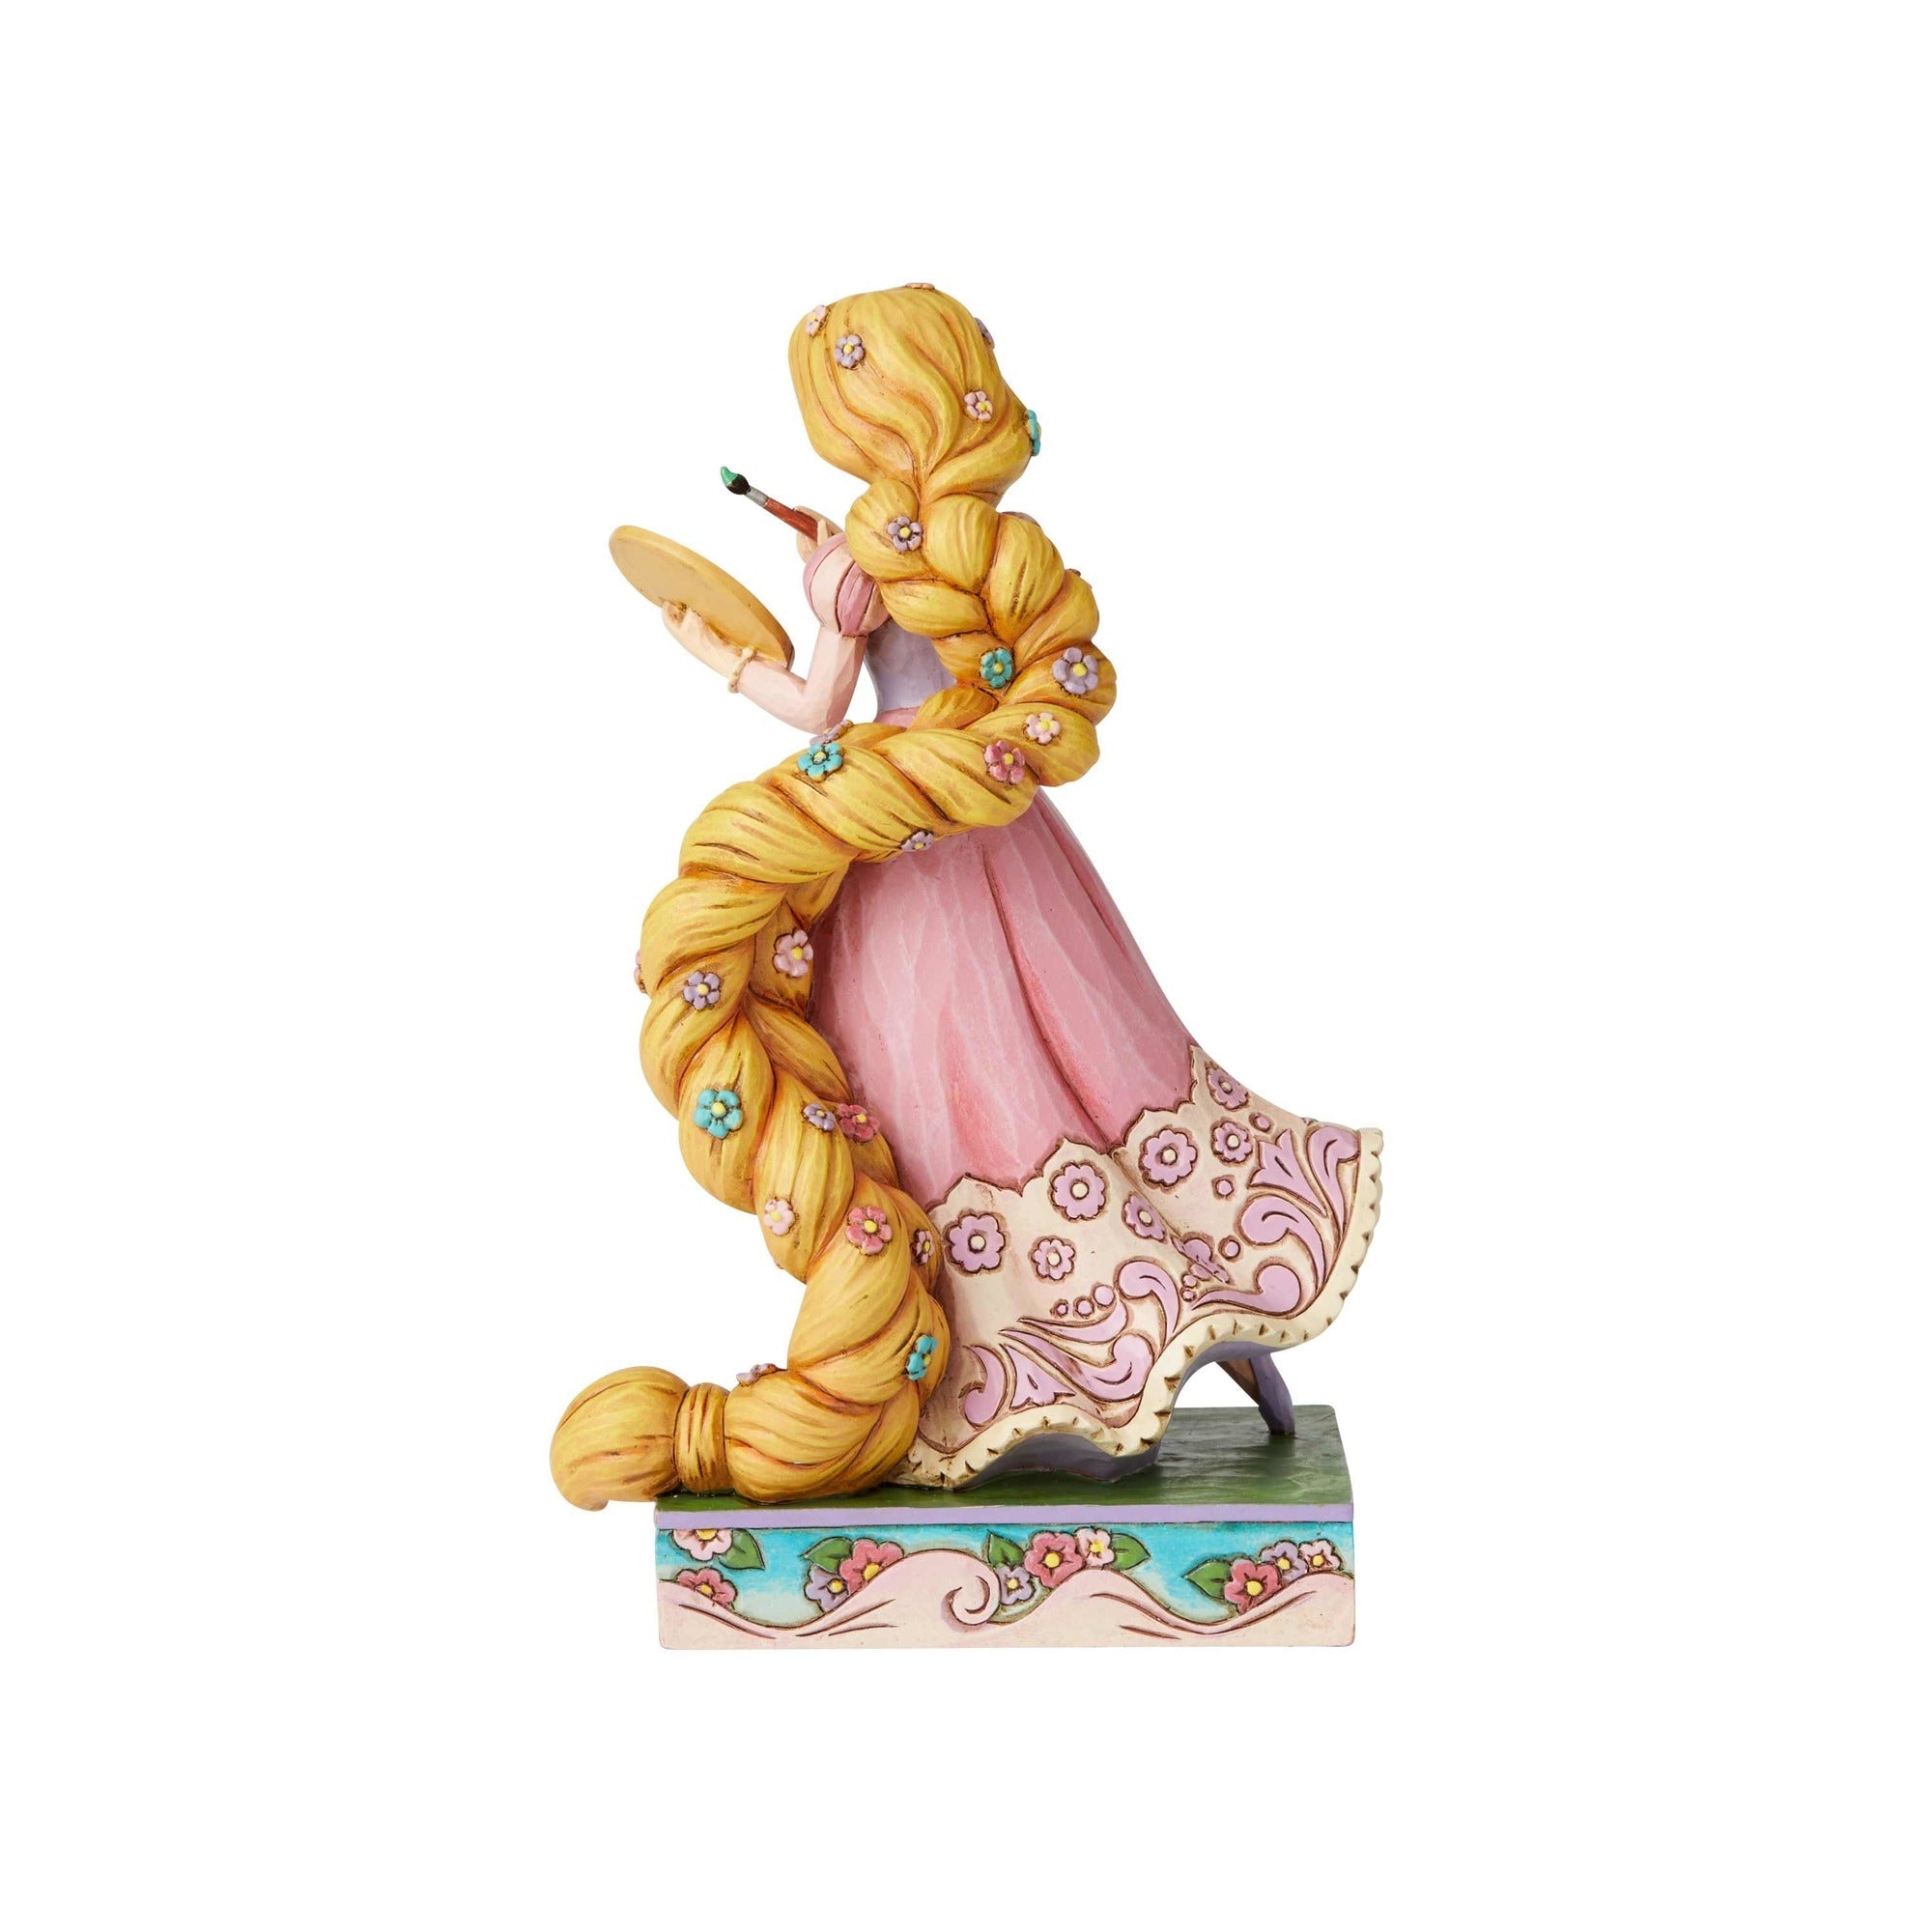 Enesco Disney Traditions Mother Gothel Statue - collectorzown